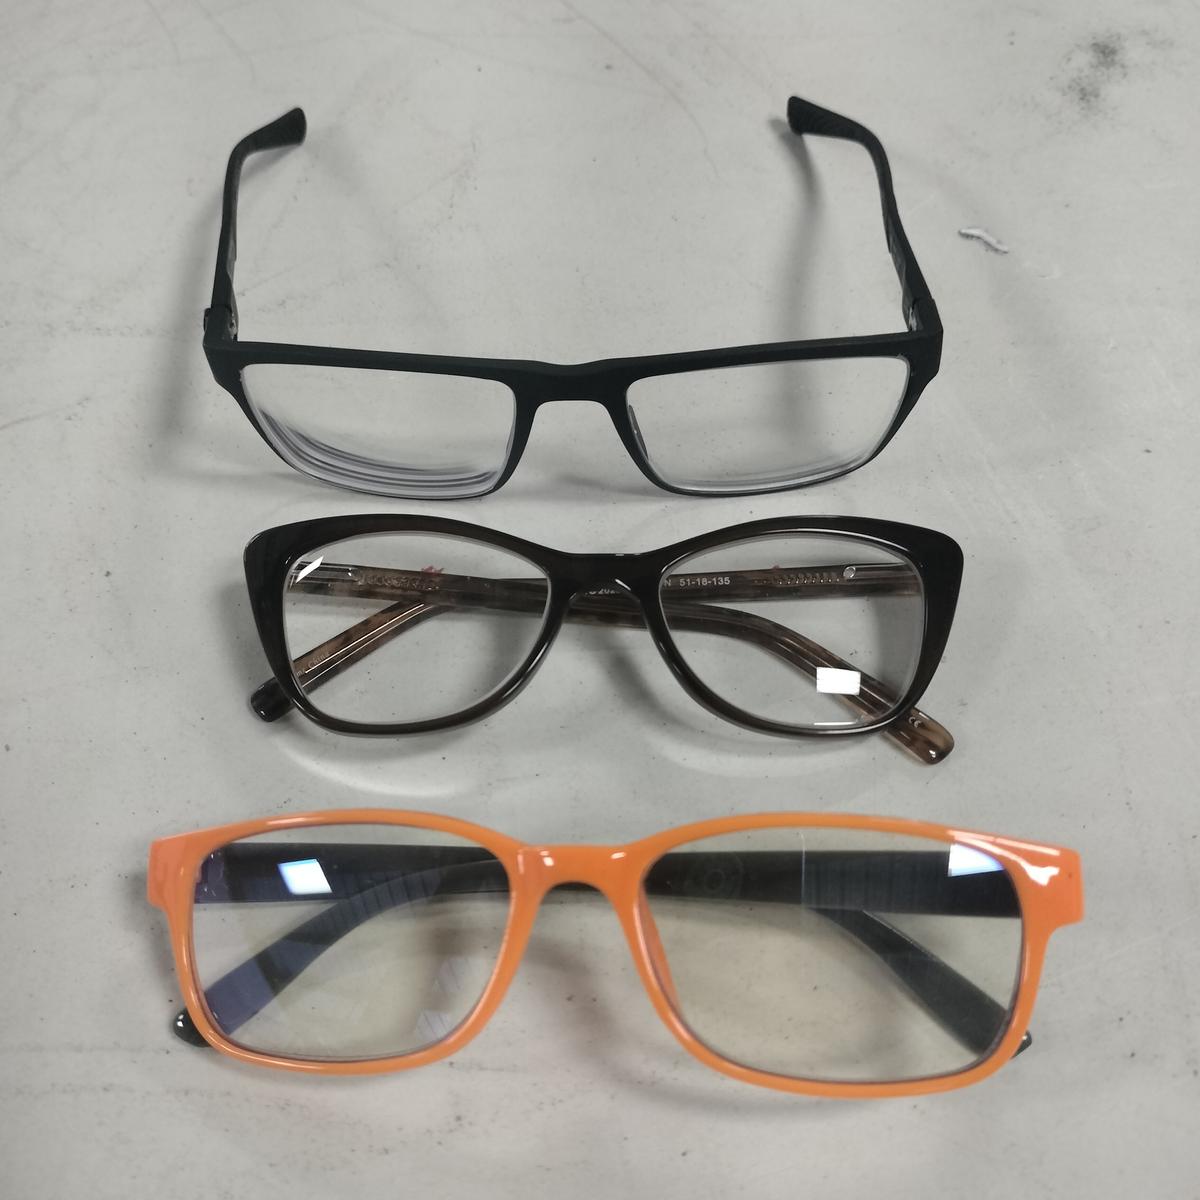 Costa Eyeglasses and 2 others